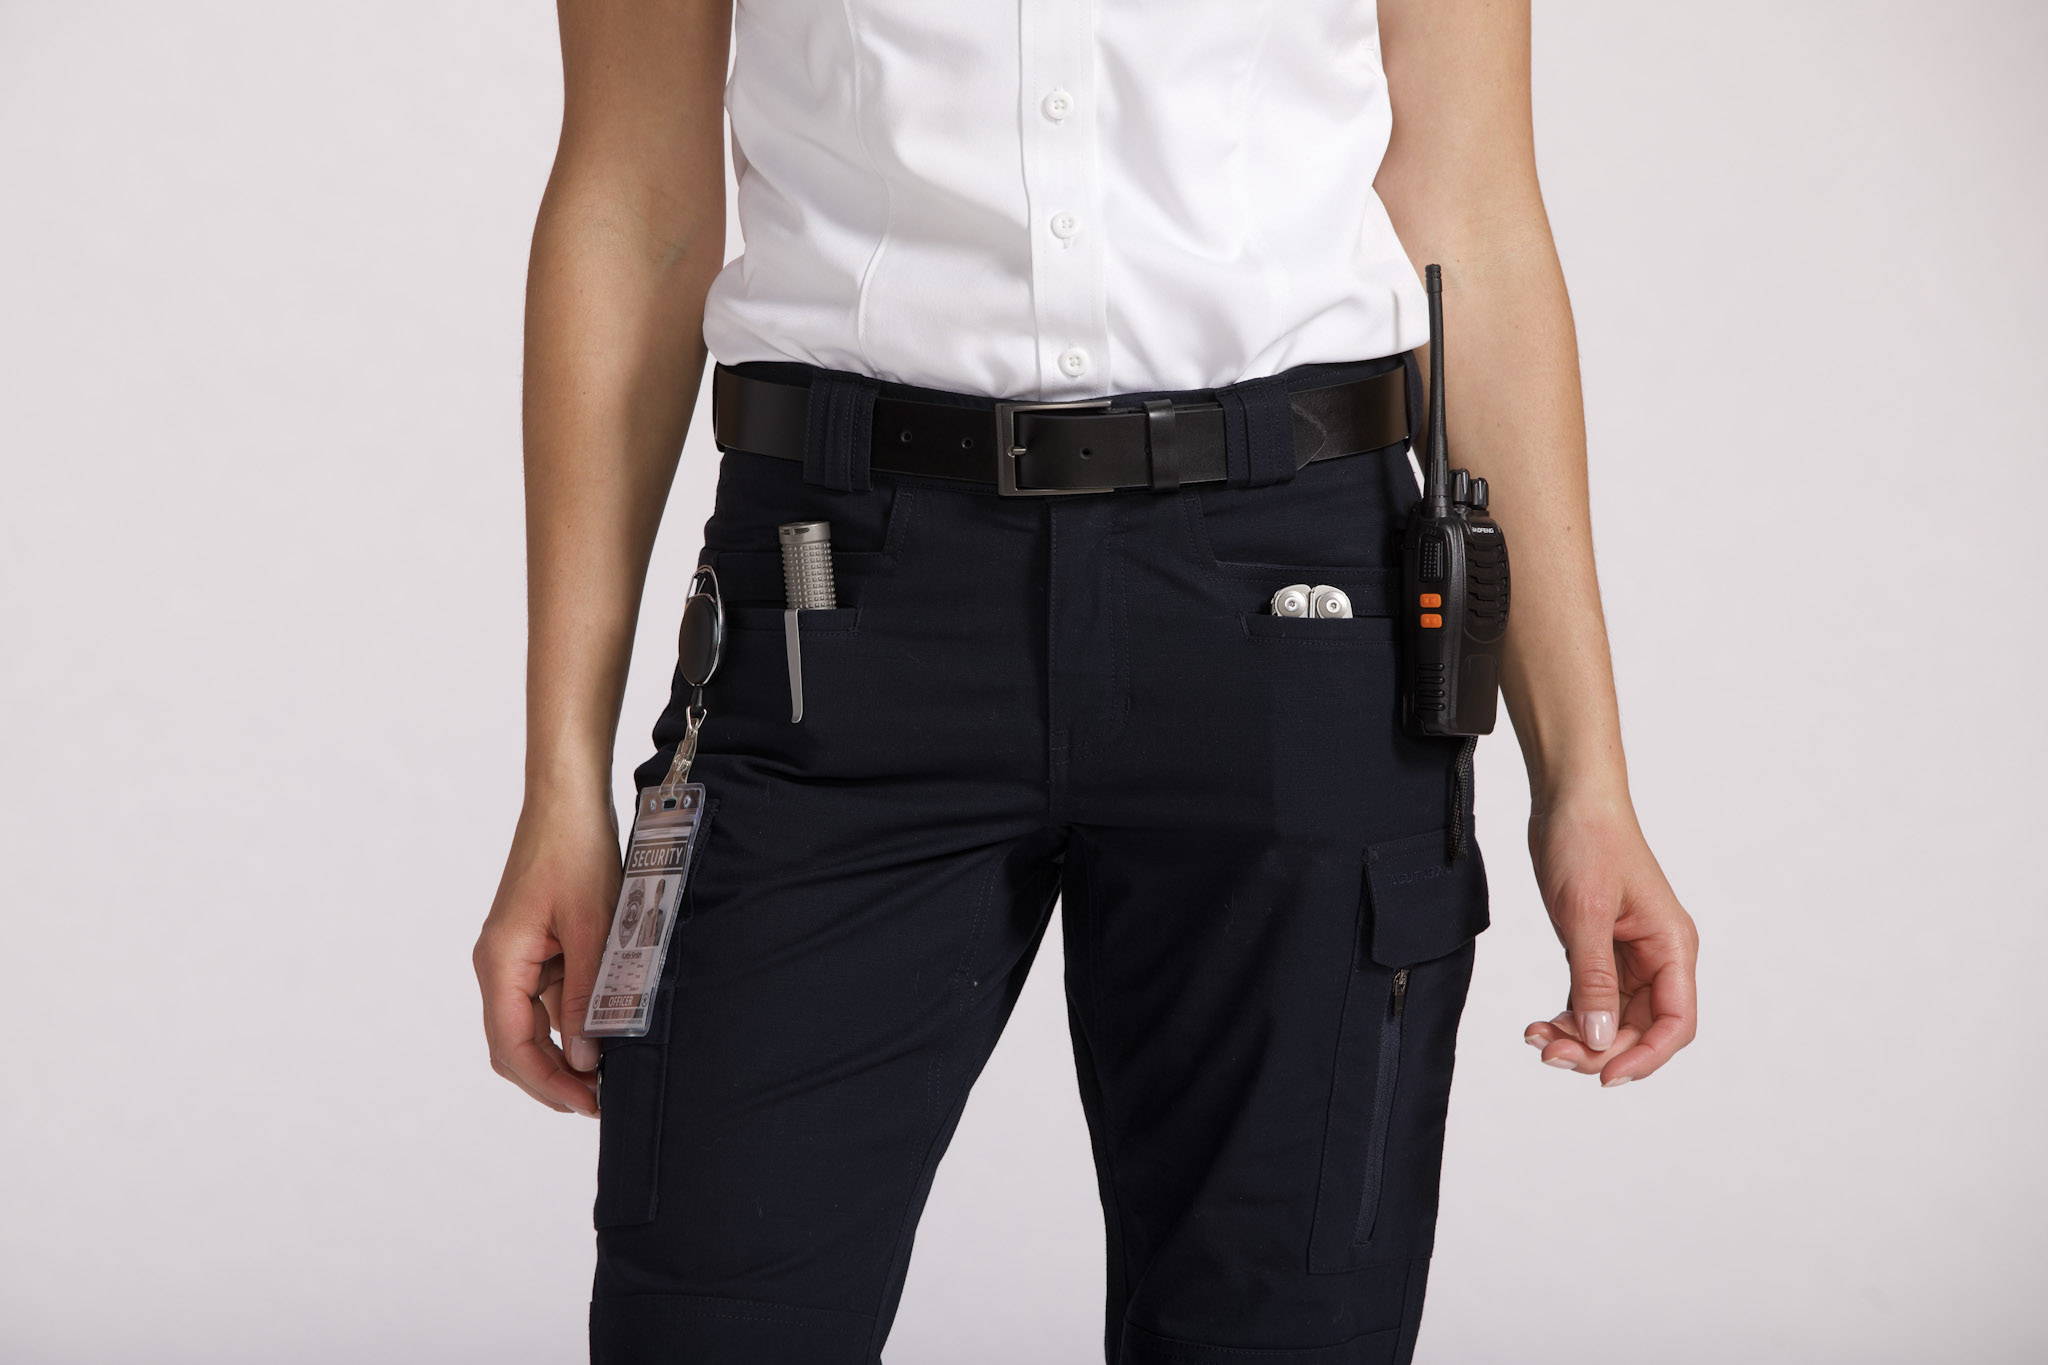 Ladies Stretch Pants, Stretch Ops Tactical Pants